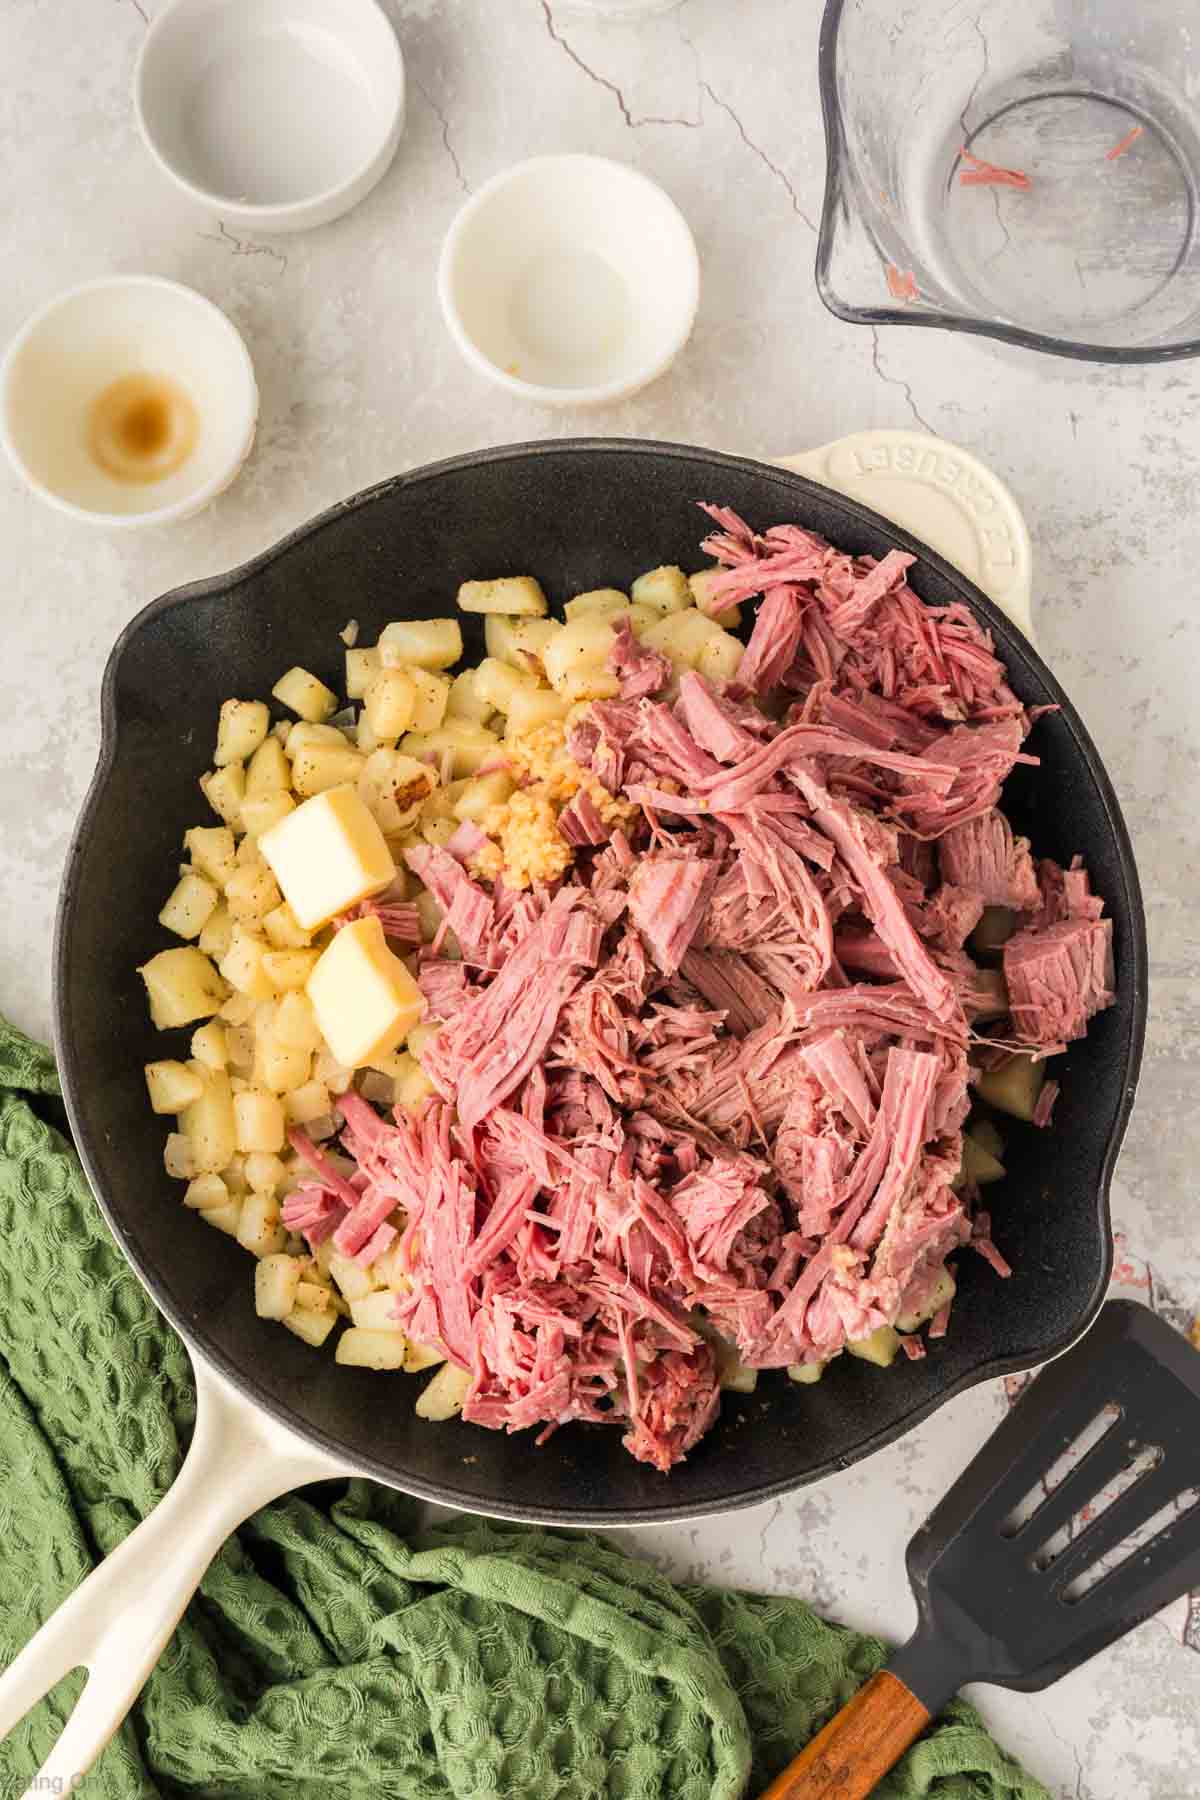 Adding in the corned beef and butter to the skillet with the vegetables